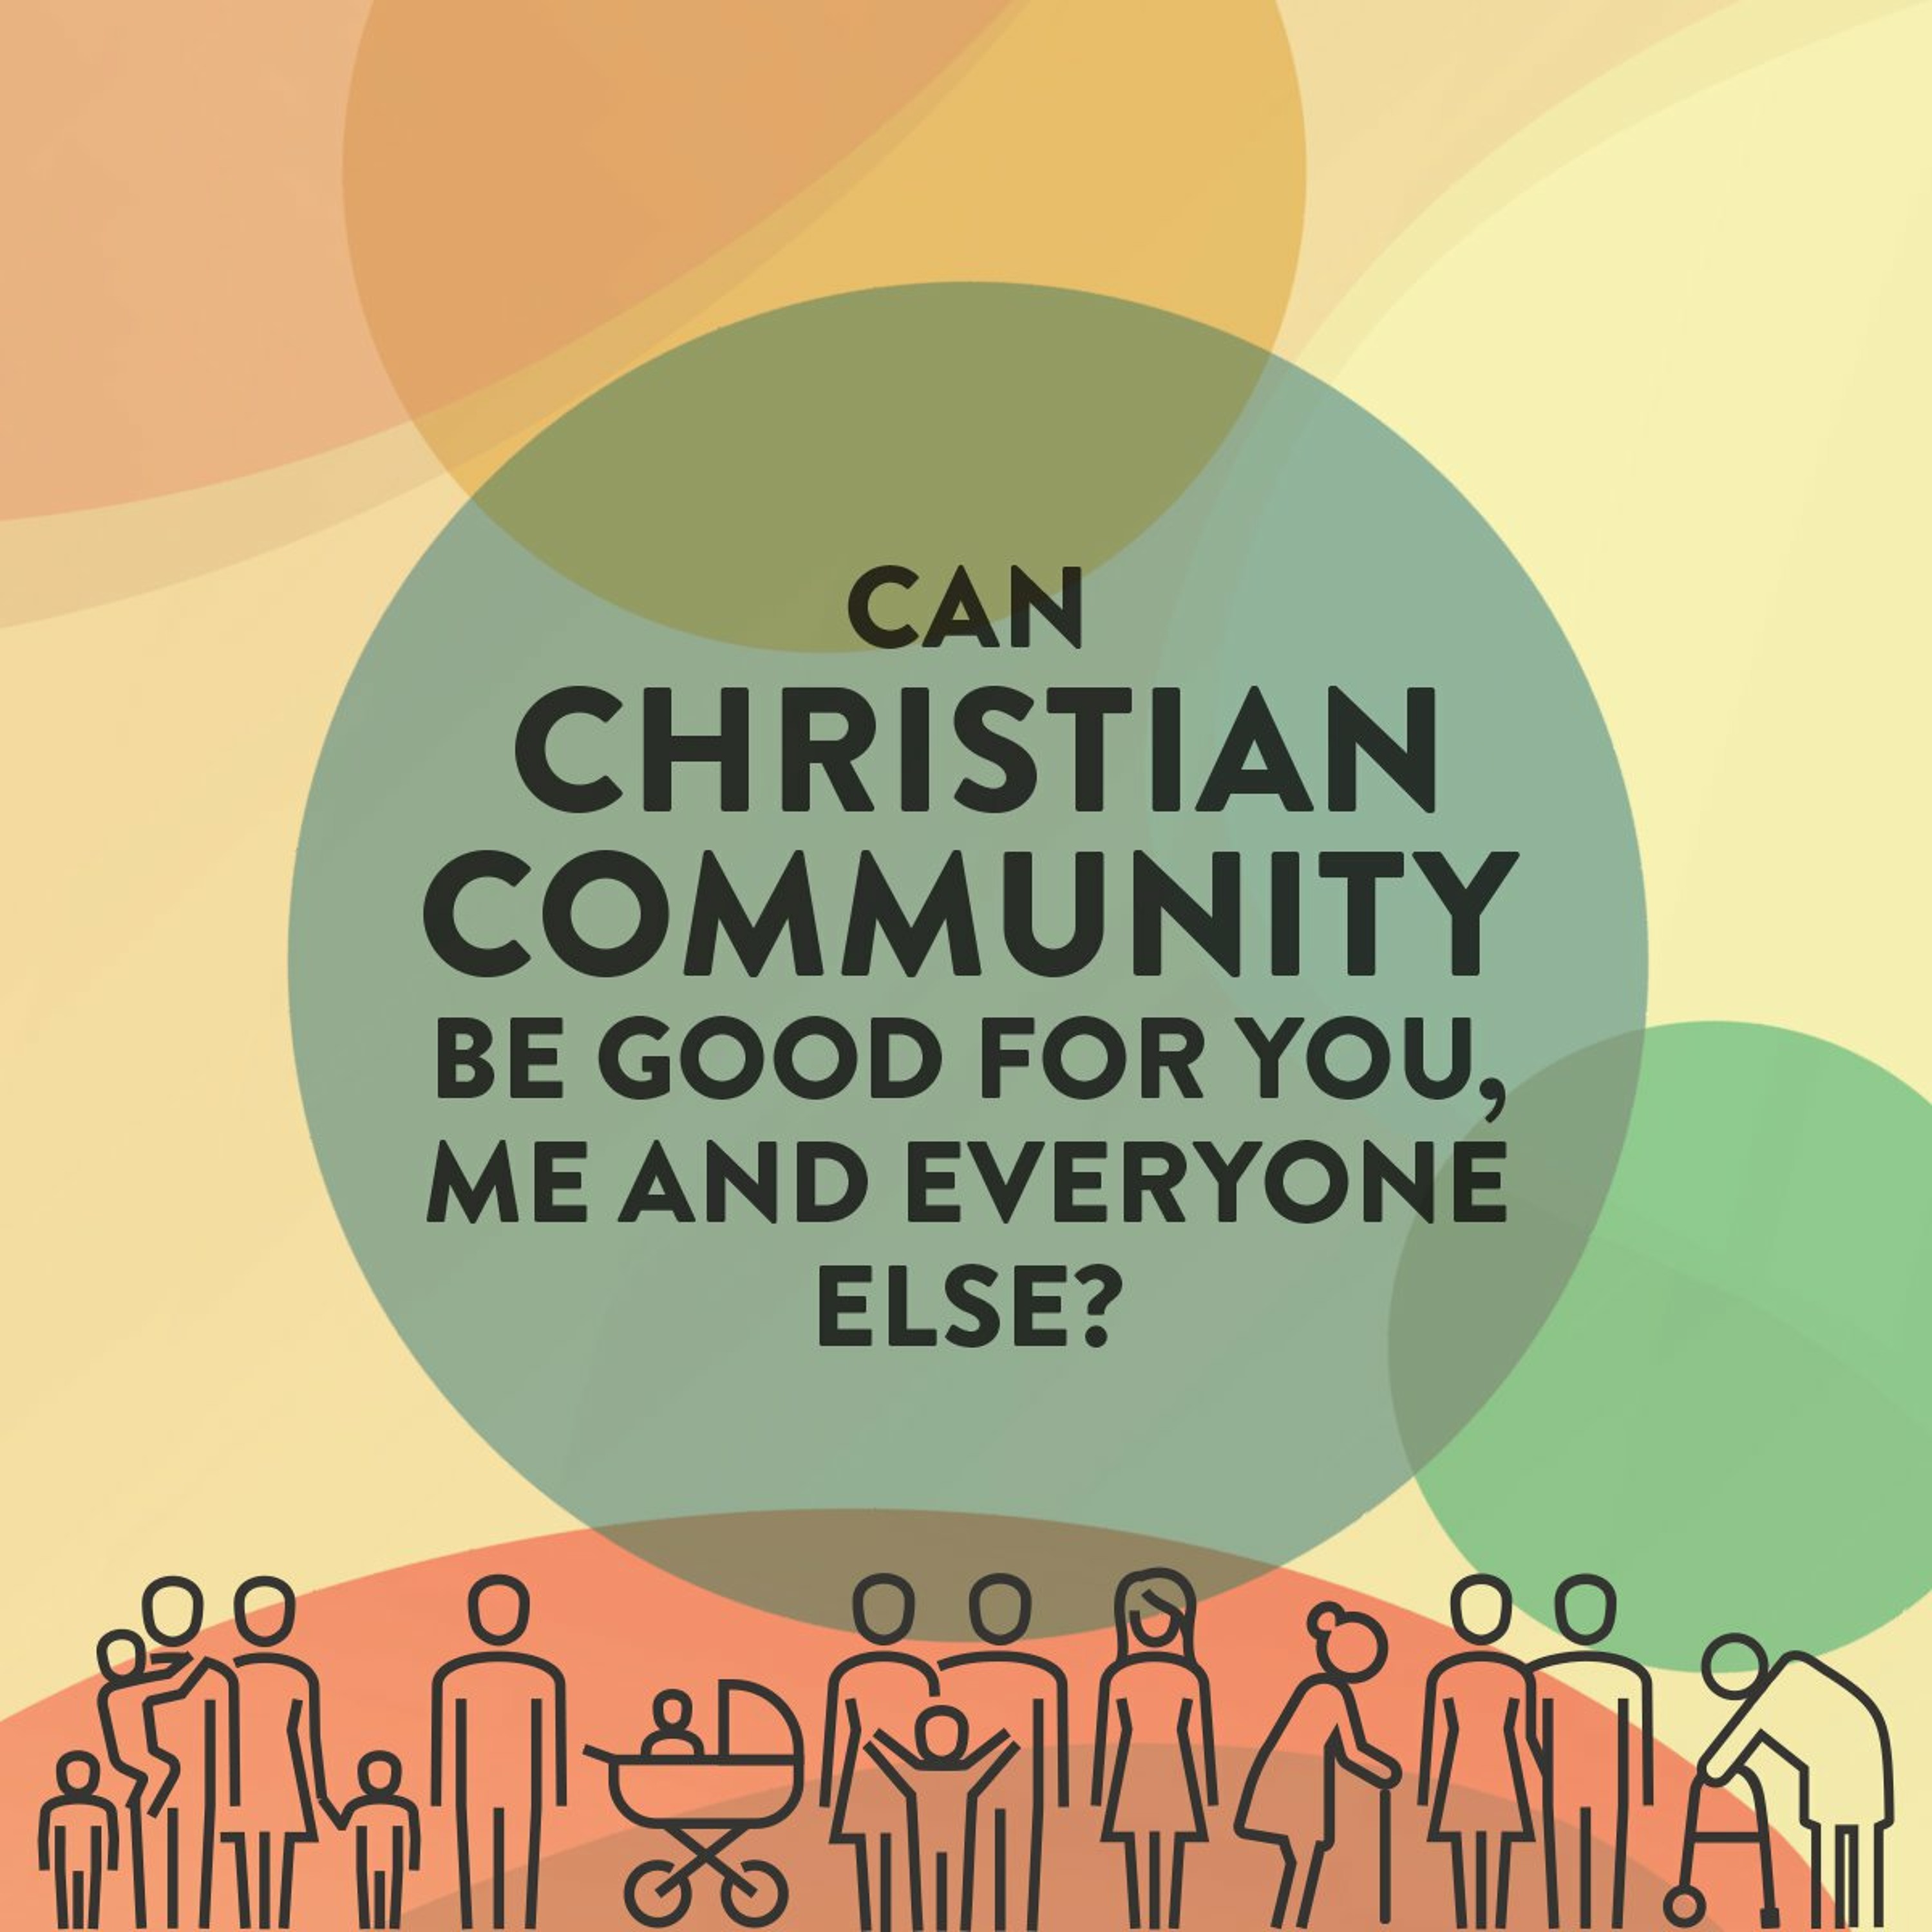 056: Can Christian community be good for you, me and everyone else?